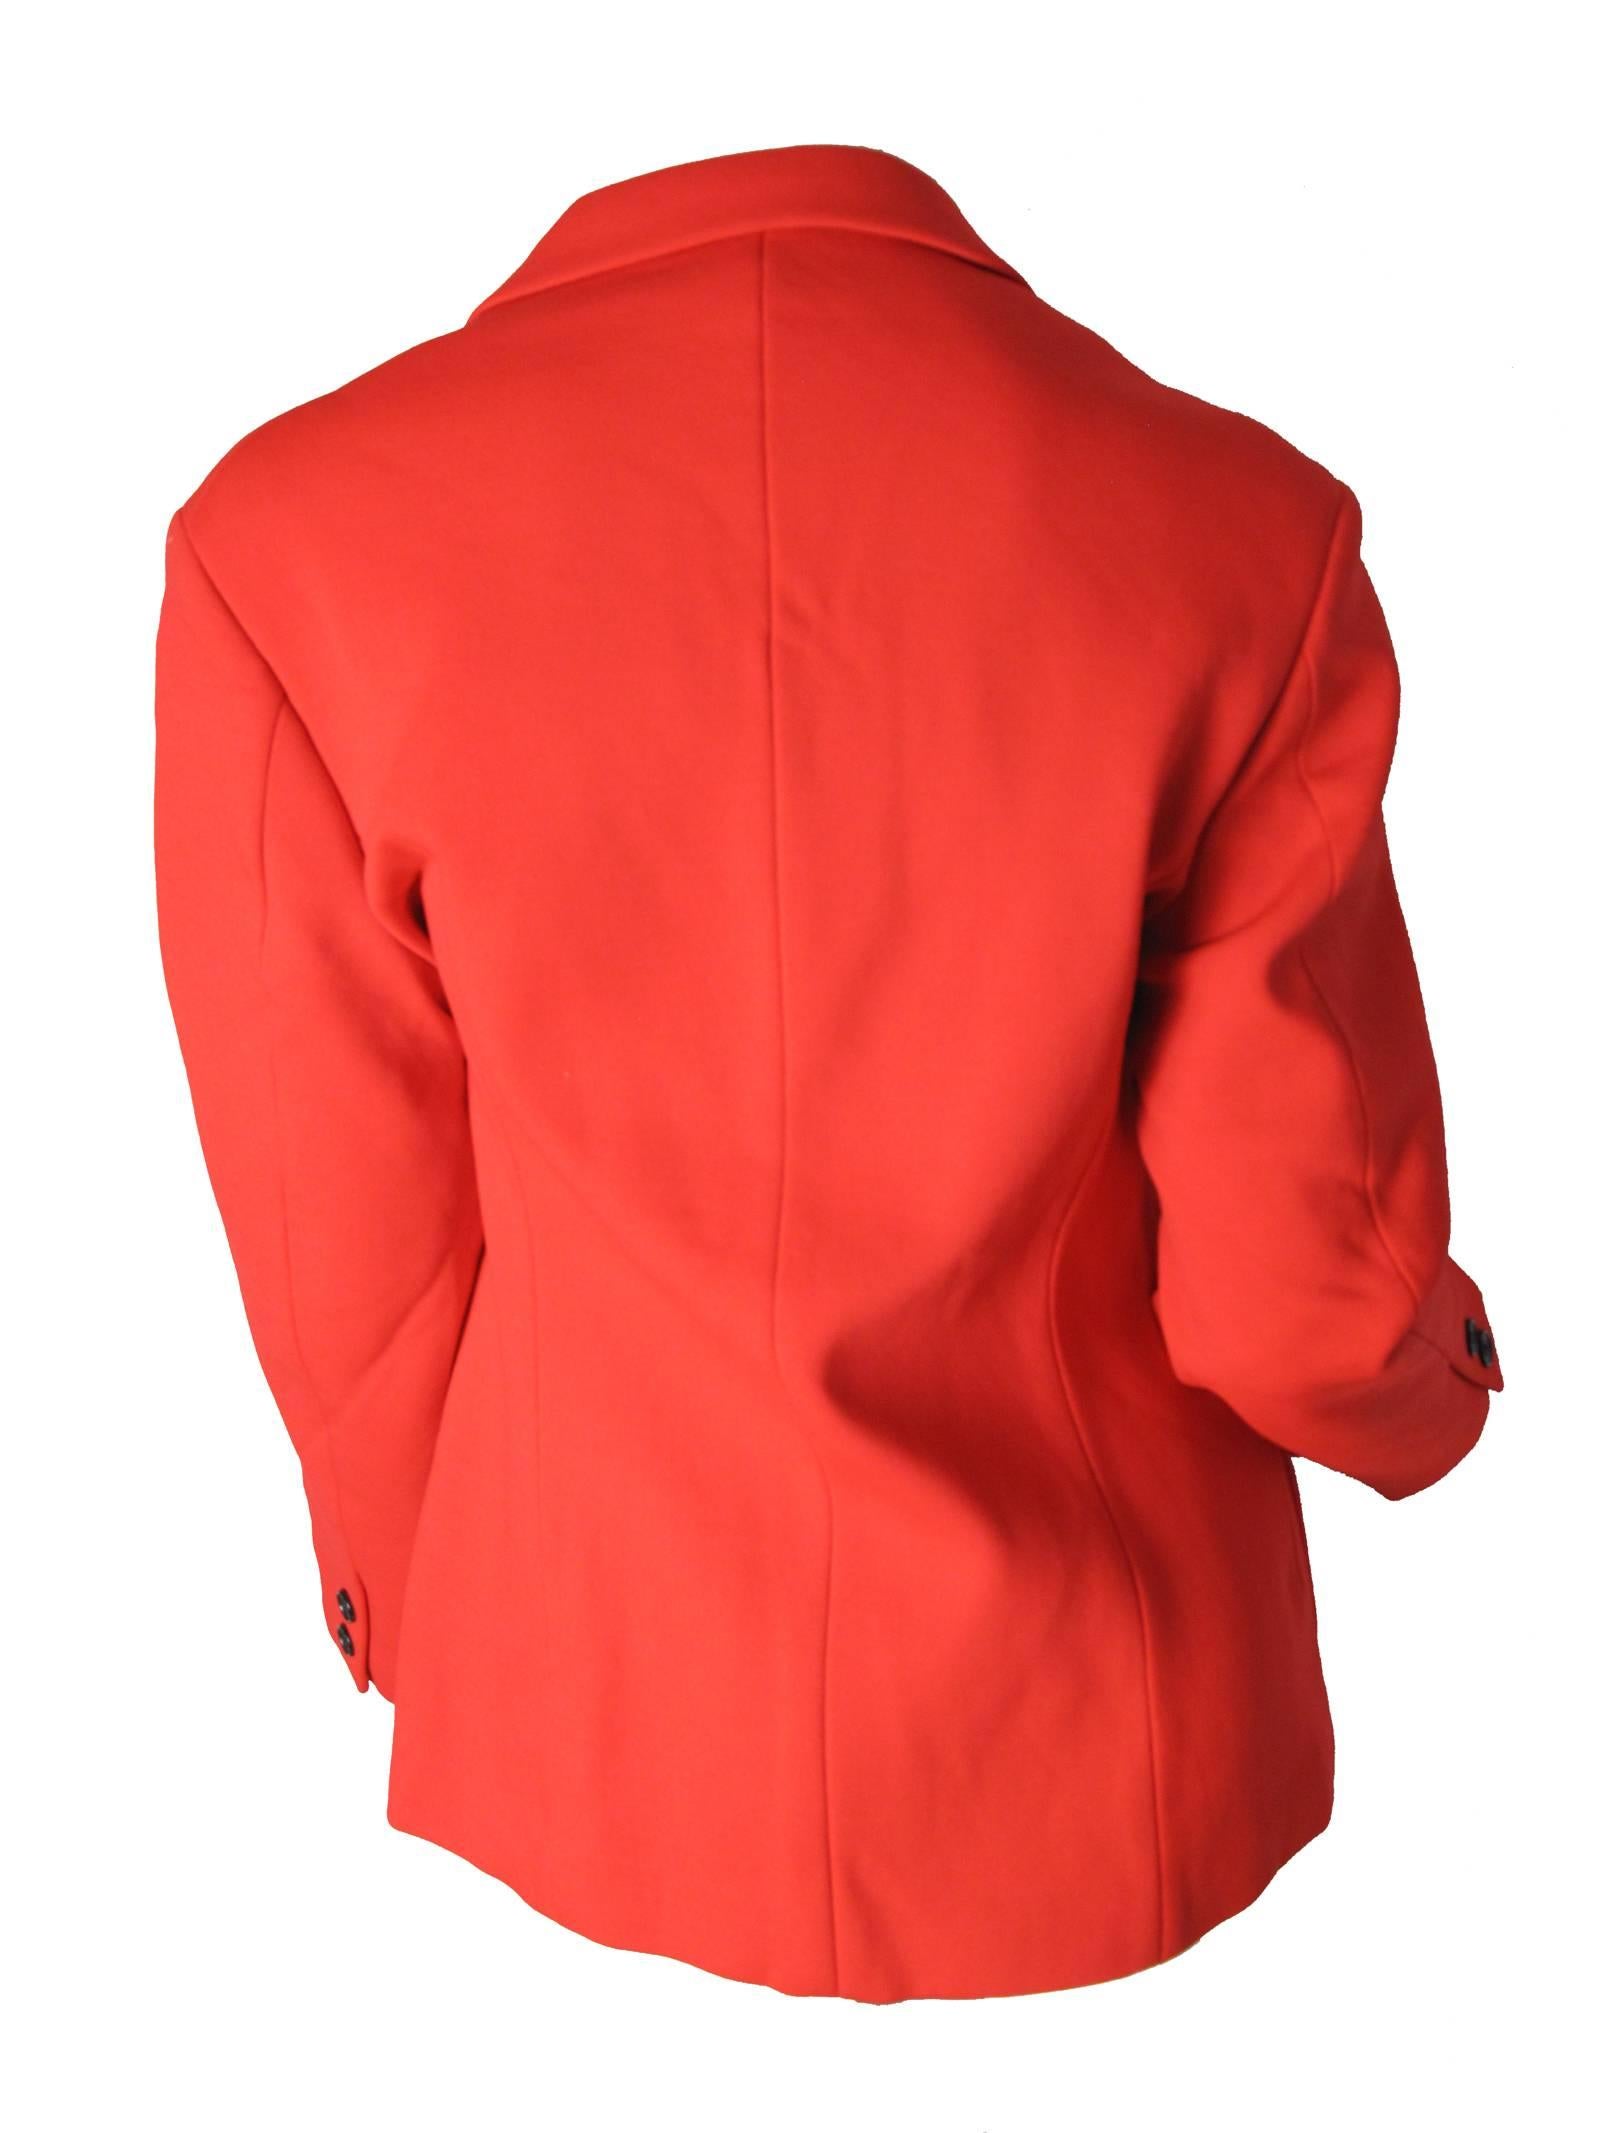 1980s Yohji Yamamoto red nylon and polyurethane blazer.  One button closure, two front pockets.  Condition: Very good, some very small darks spots. 
Size Medium
We accept returns for refund, please see our terms.  We offer free ground shipping